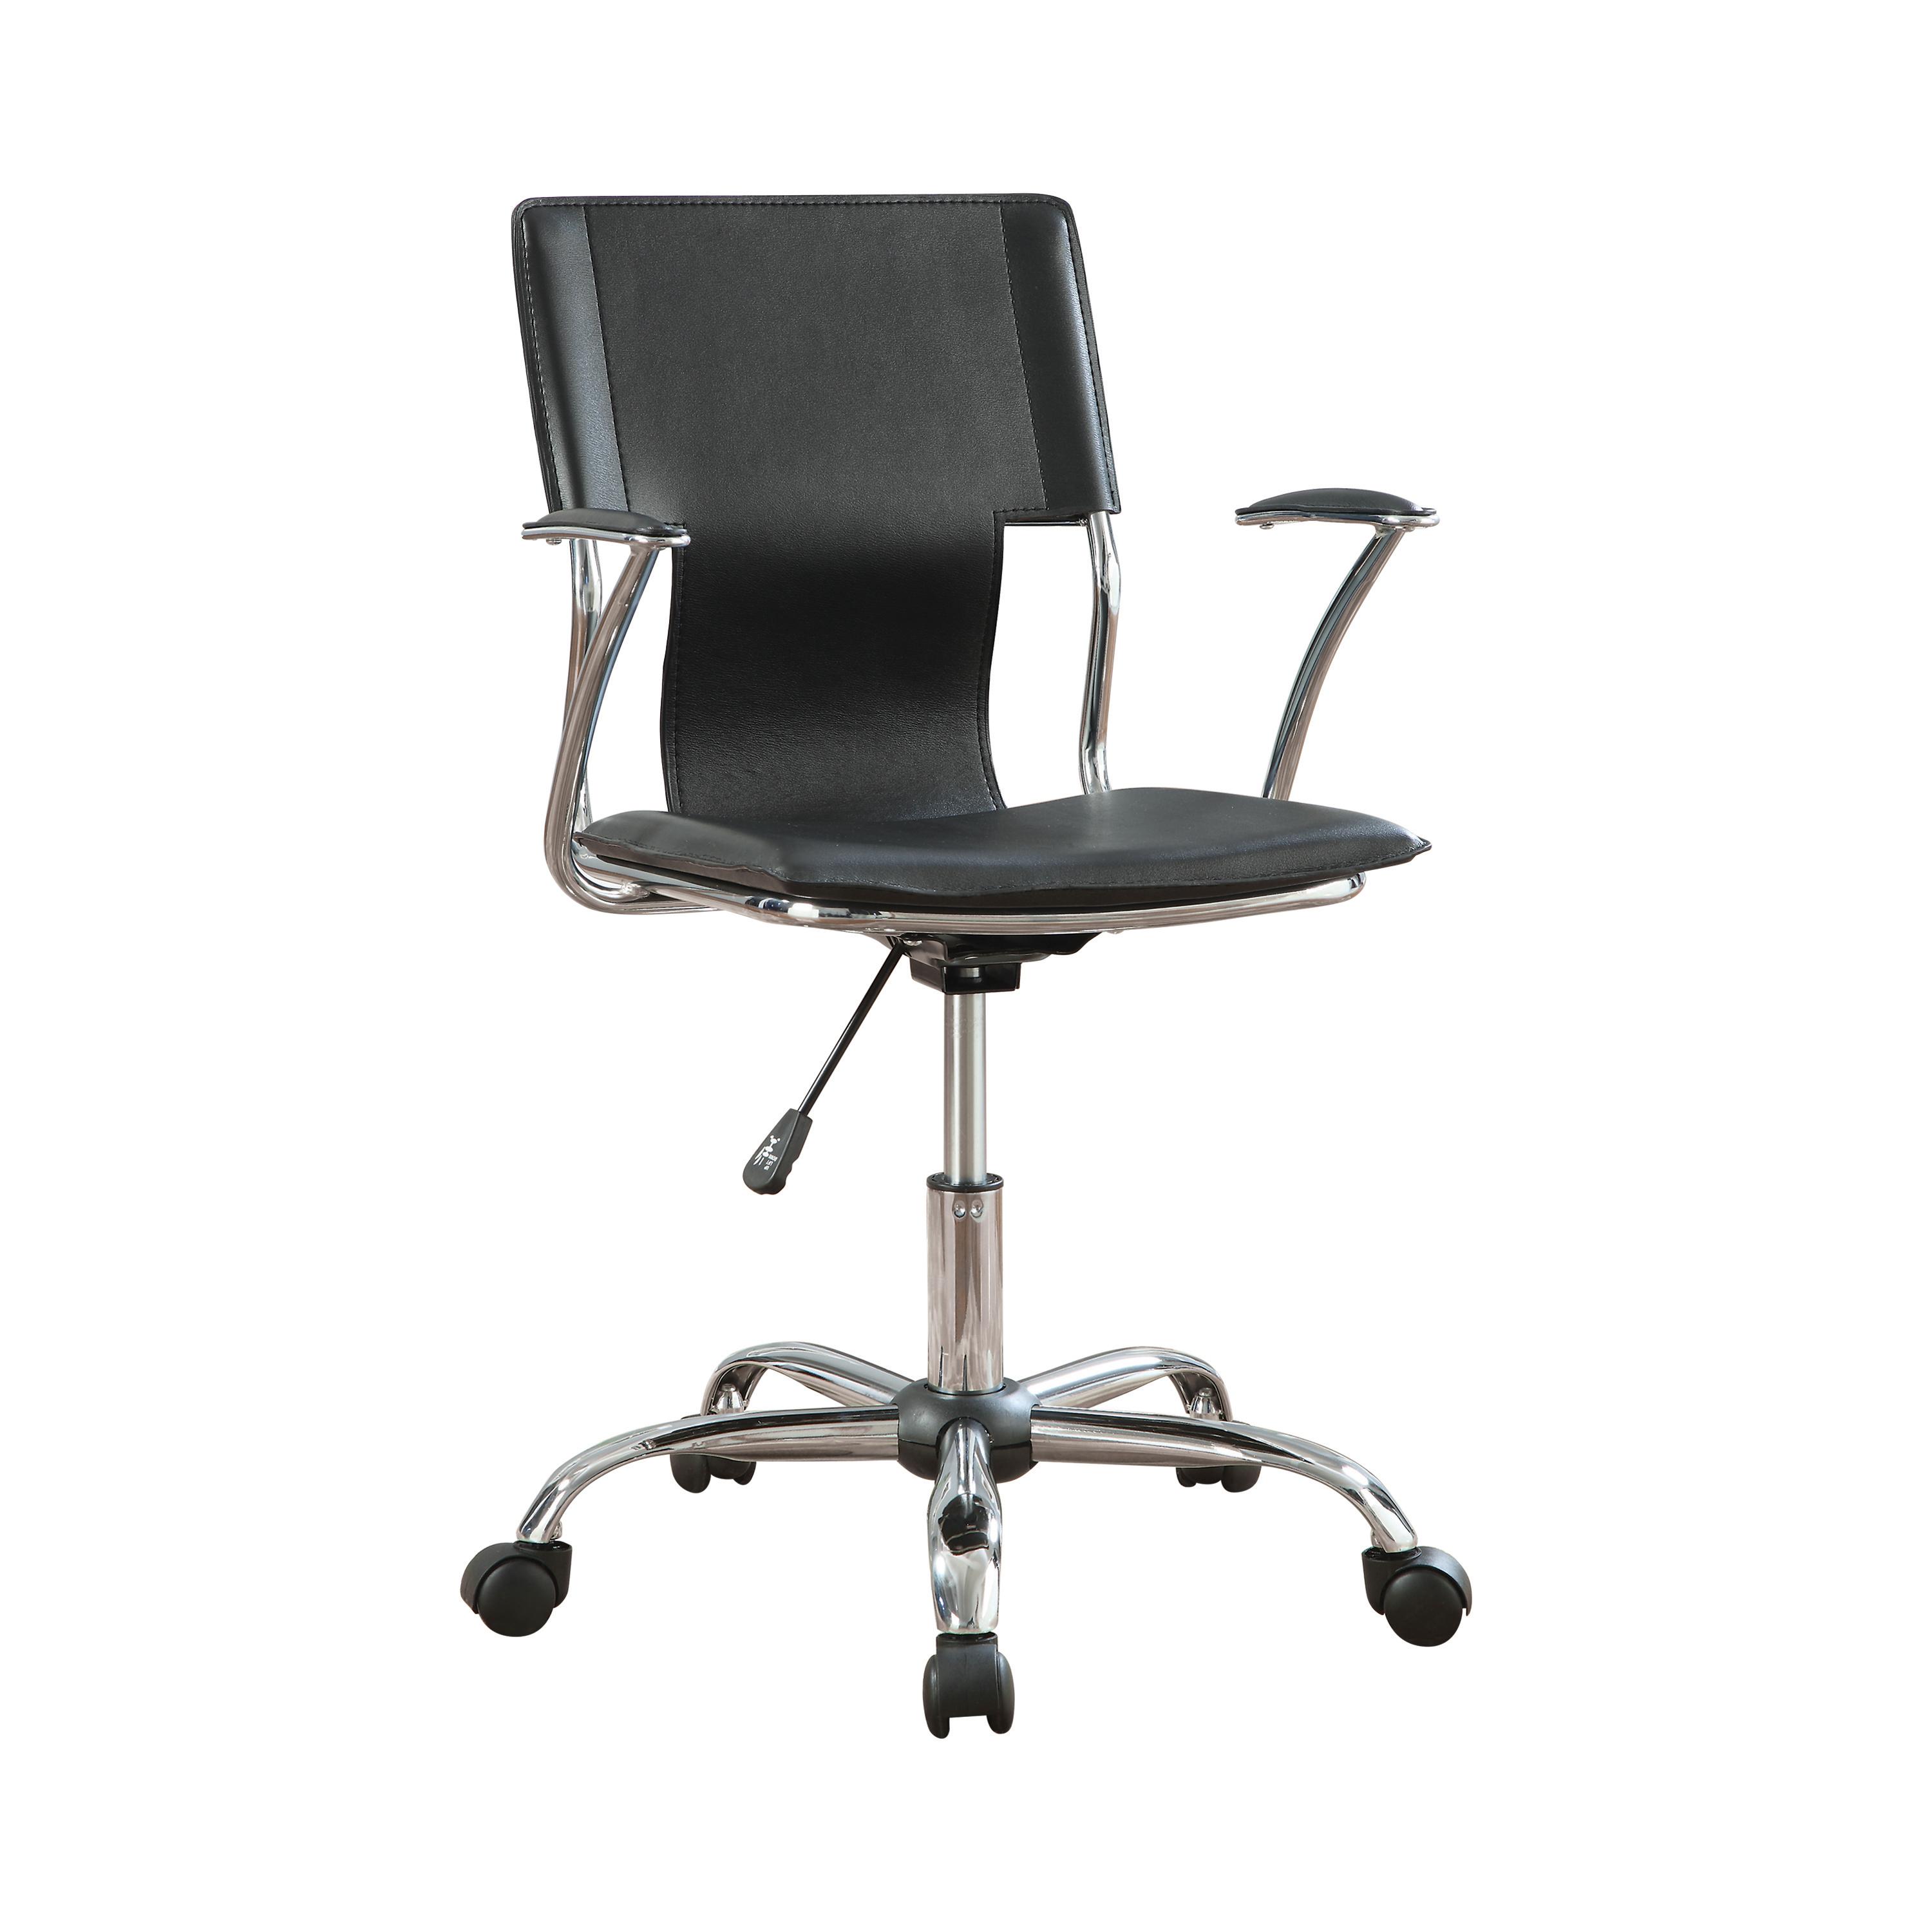 Modern Office Chair 800207 800207 in Black Leatherette